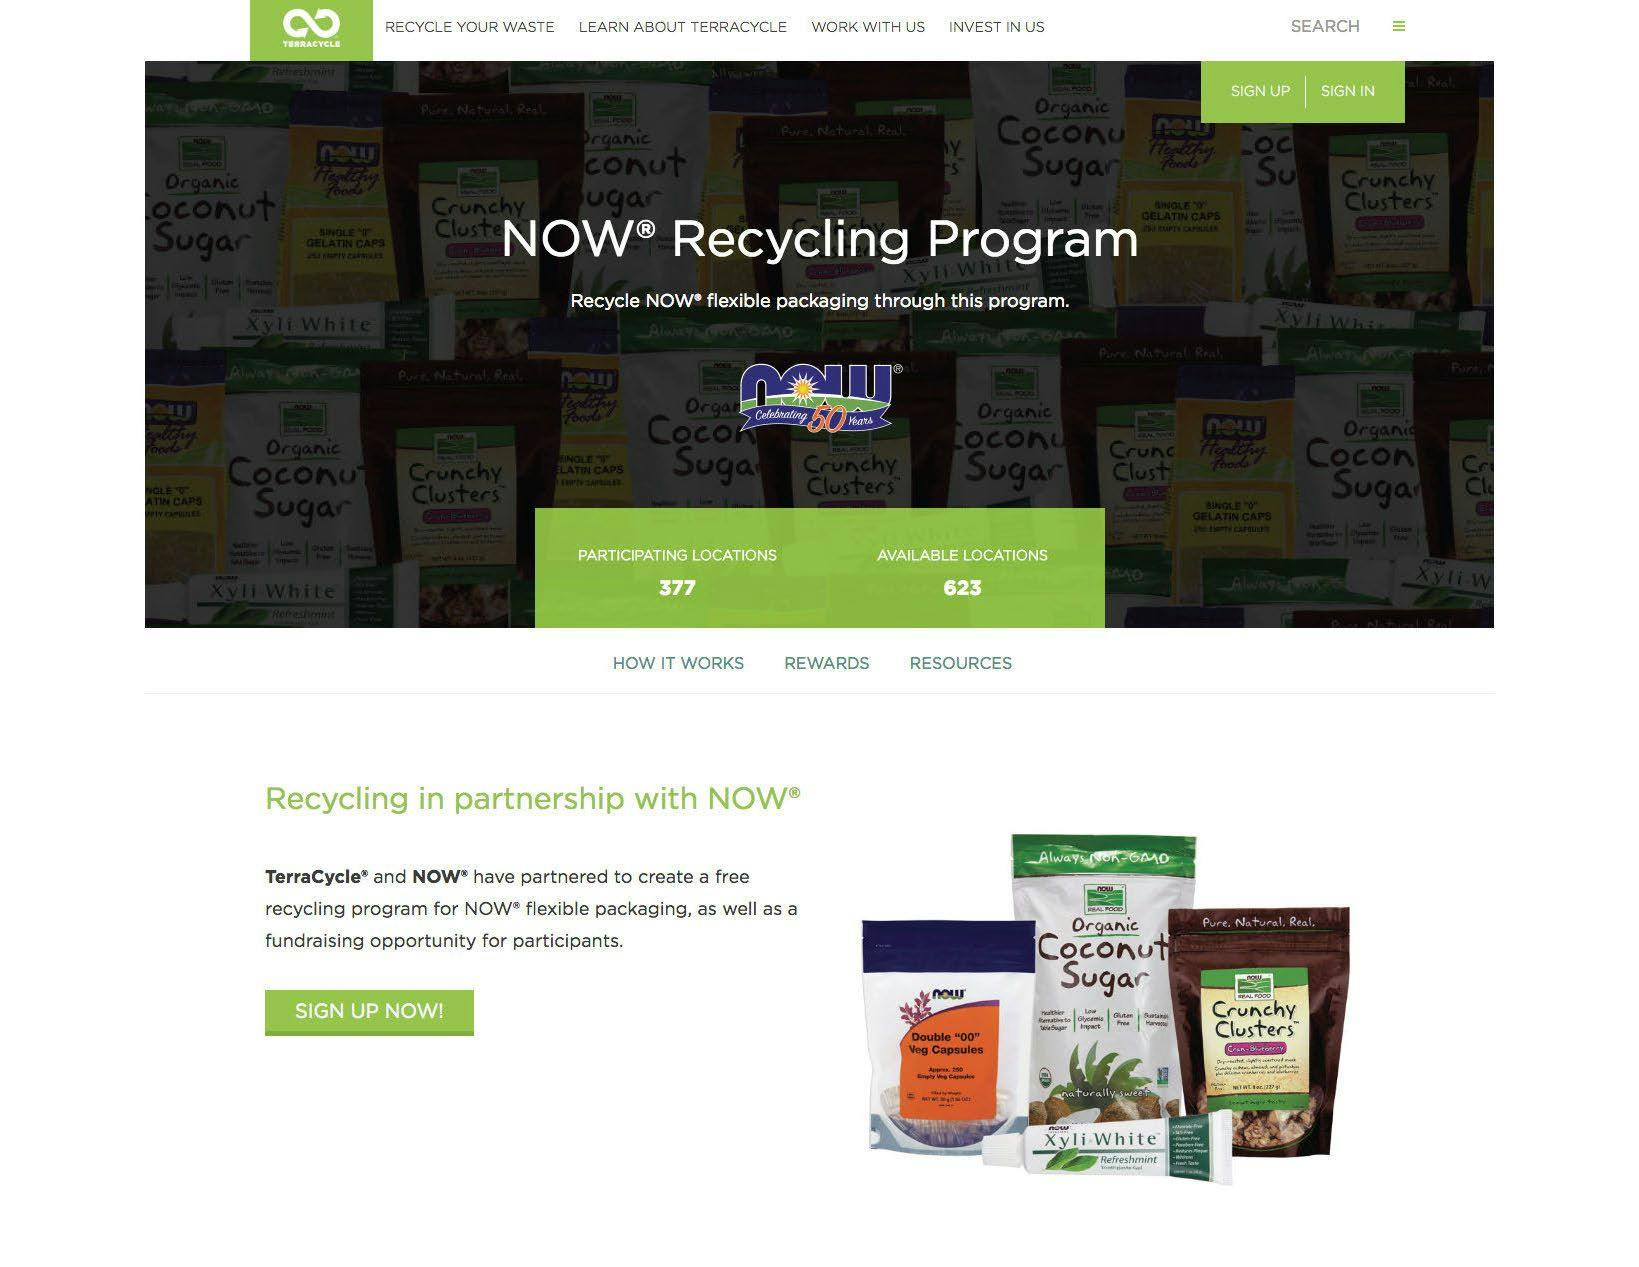 NOW collecting consumers’ used tubes, pouches for new recycling program